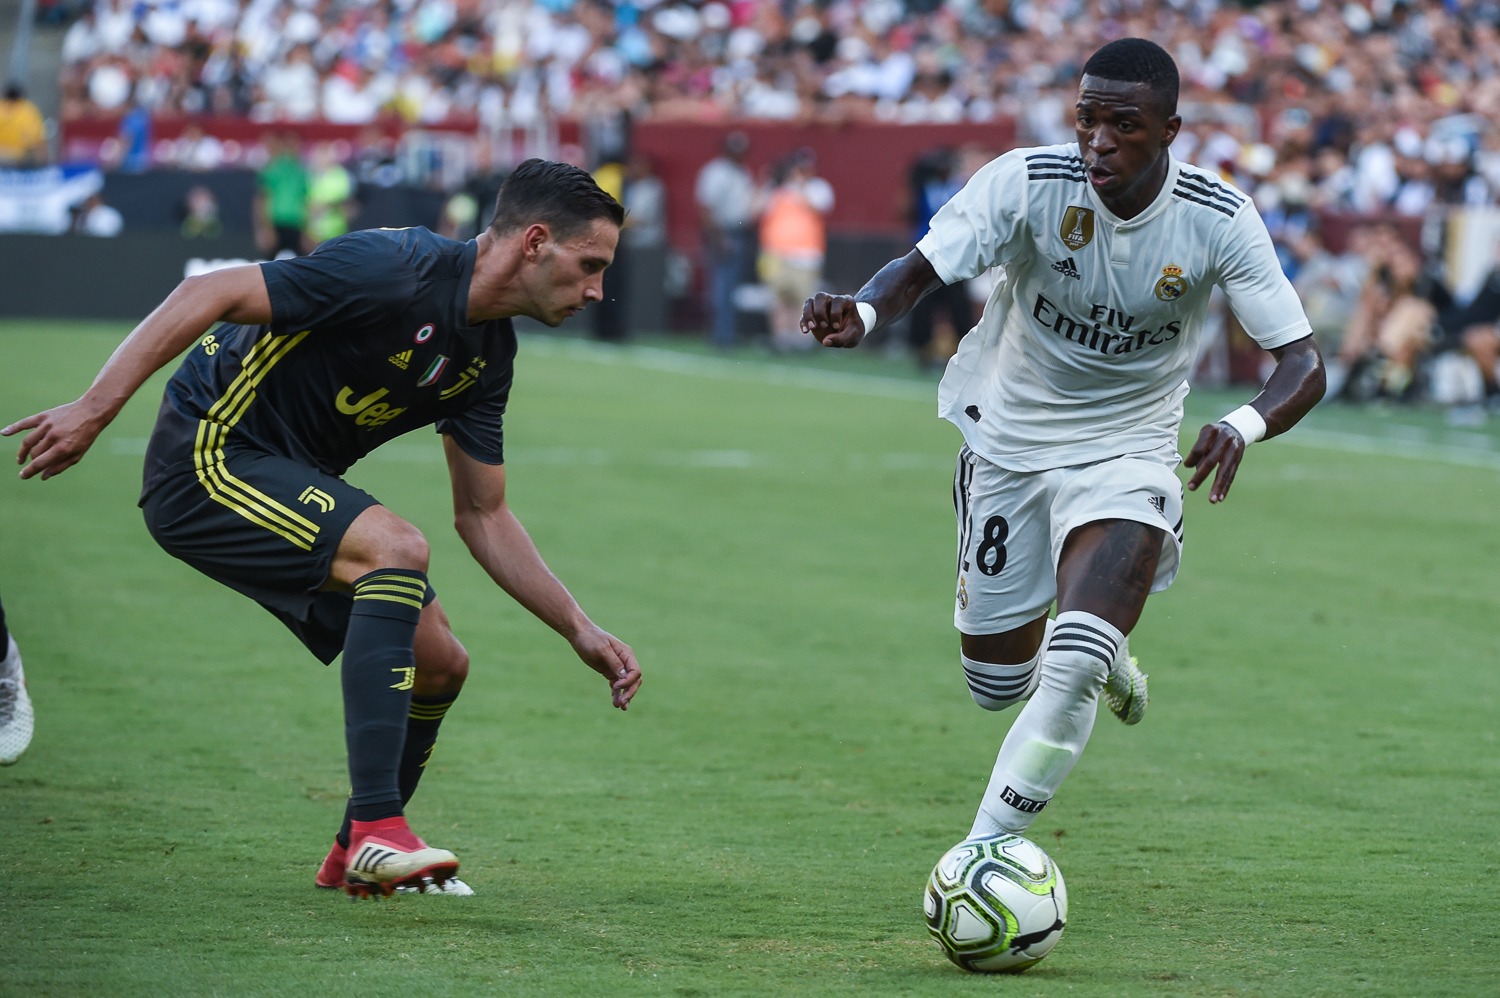 Vinicius Jr. was the target of racist abuse during the 20222-2023 season of LALIGA.